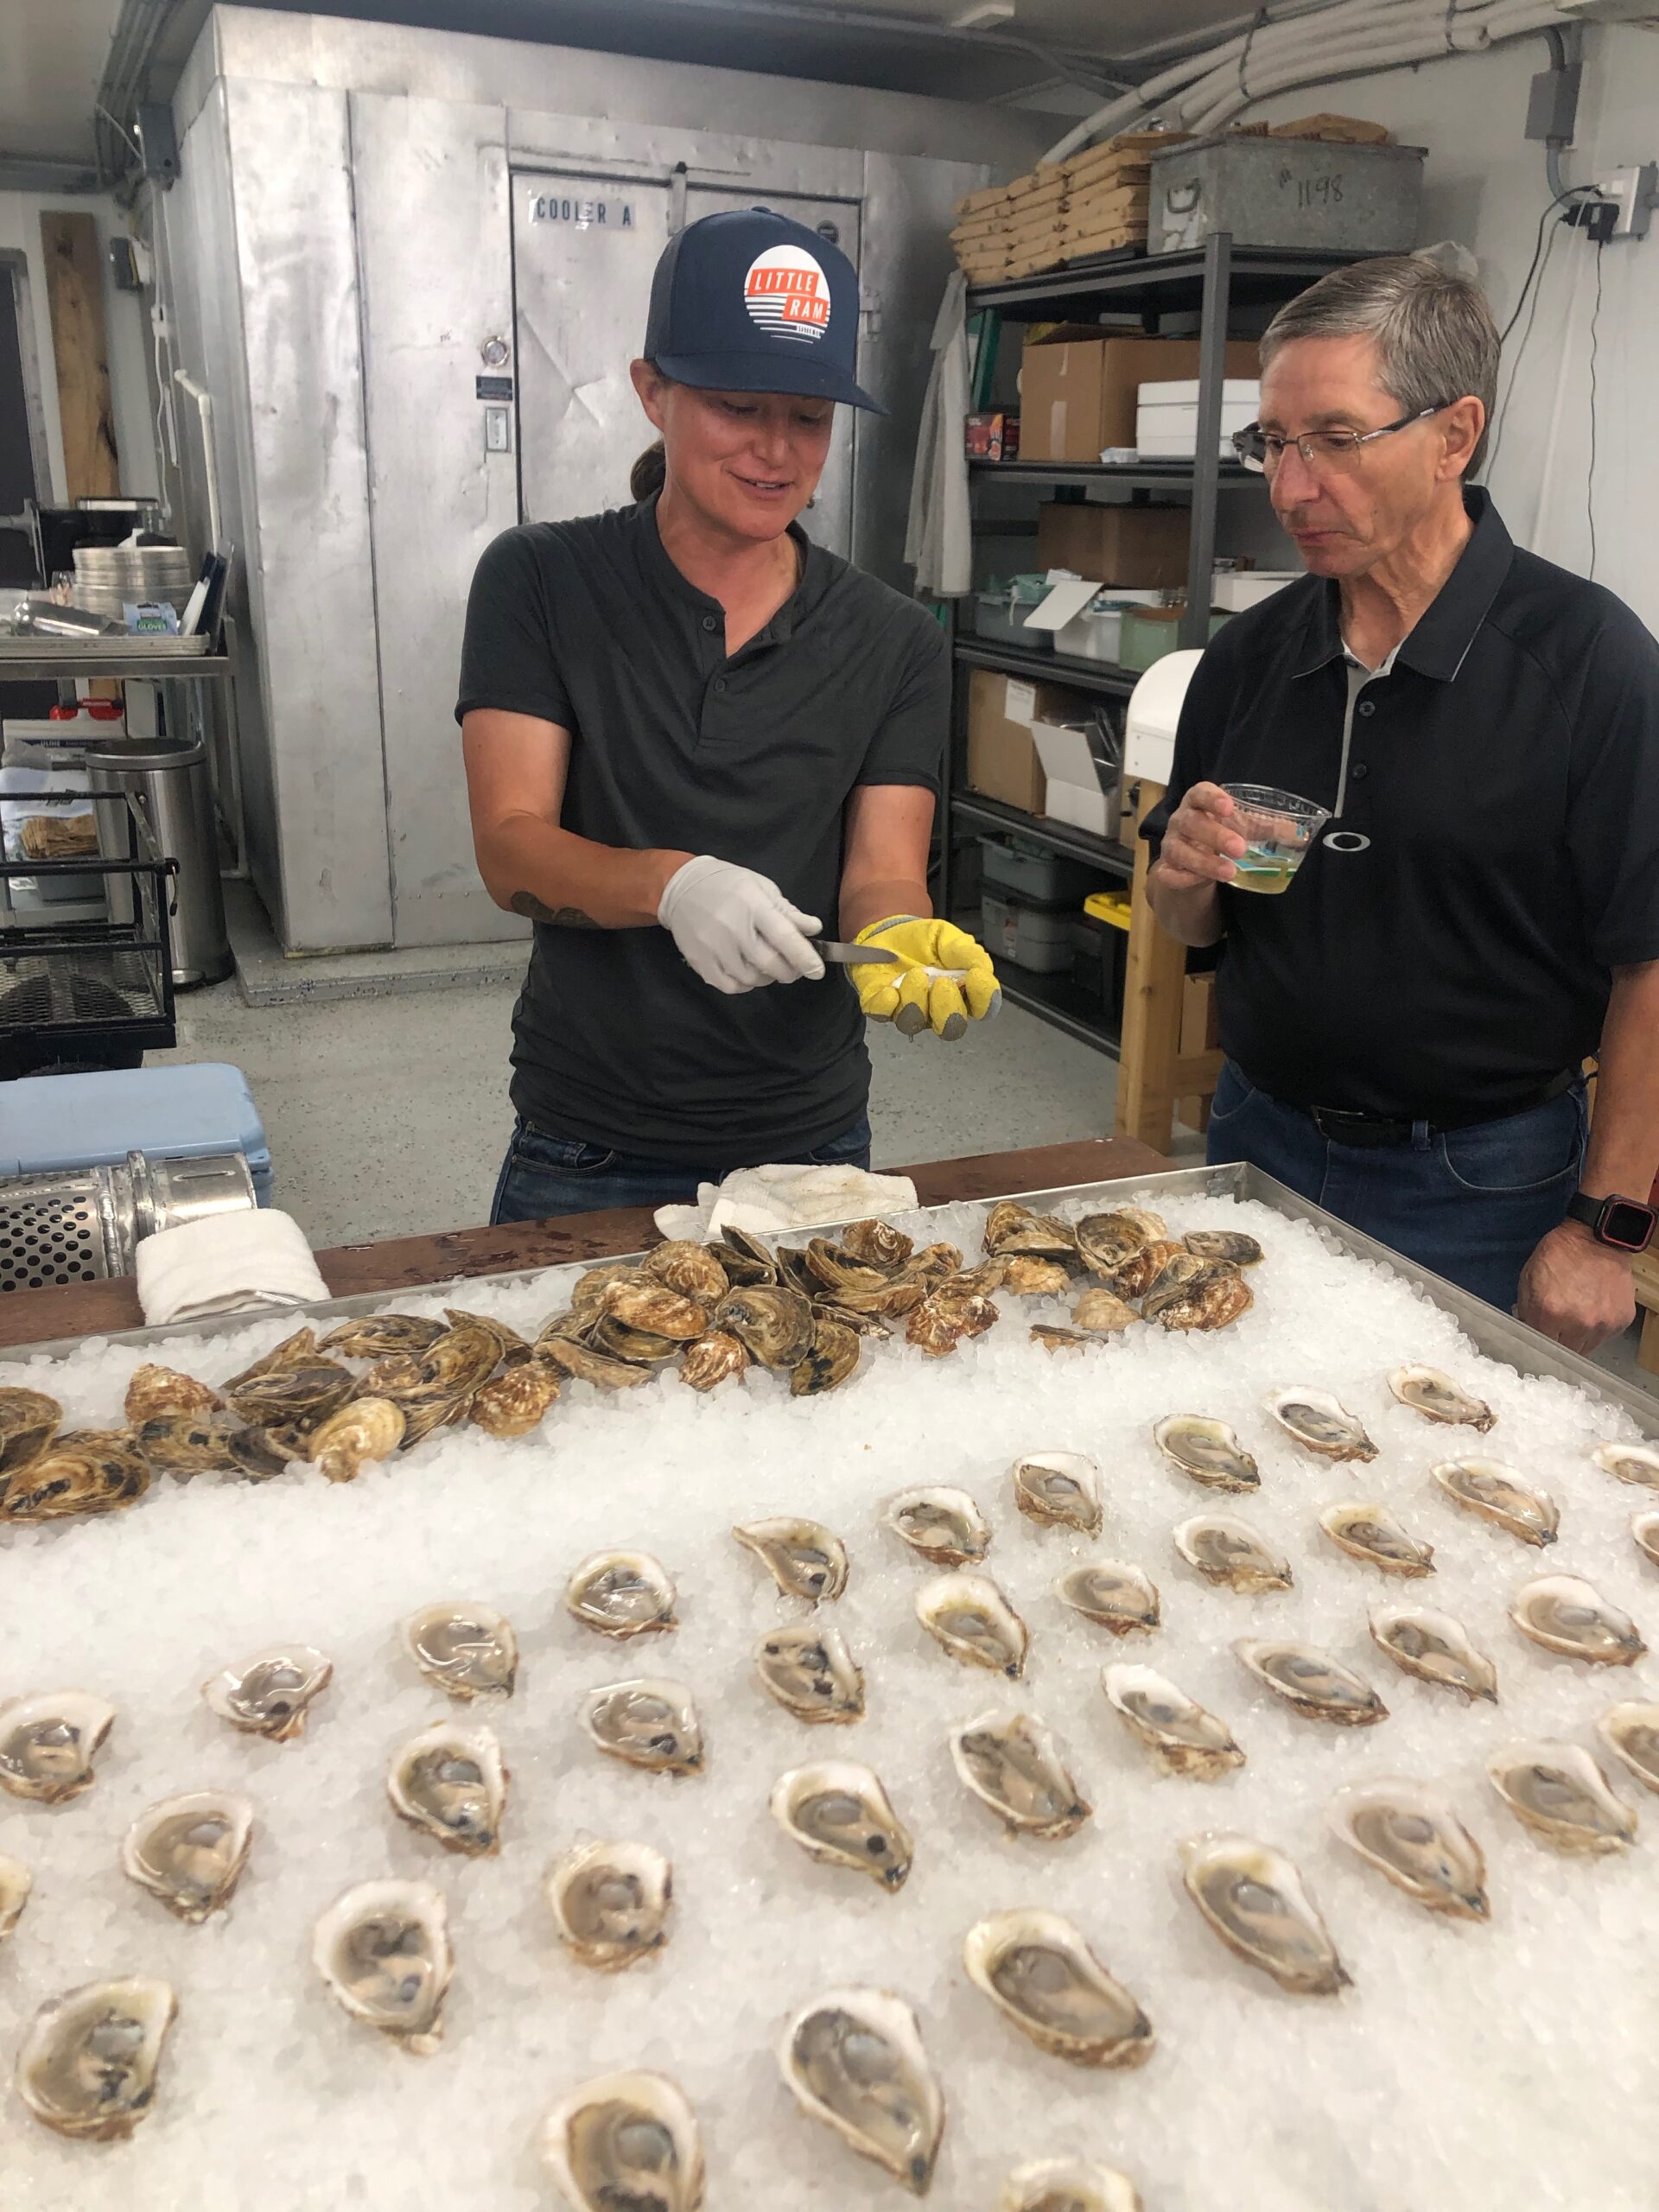 Stefanie Bassett of Little Ram Oysters gives a tour and tasting. These oysters are grown off Shelter Island where the strong current and salinity give them a crisp, briny taste. JENNY NOBLE